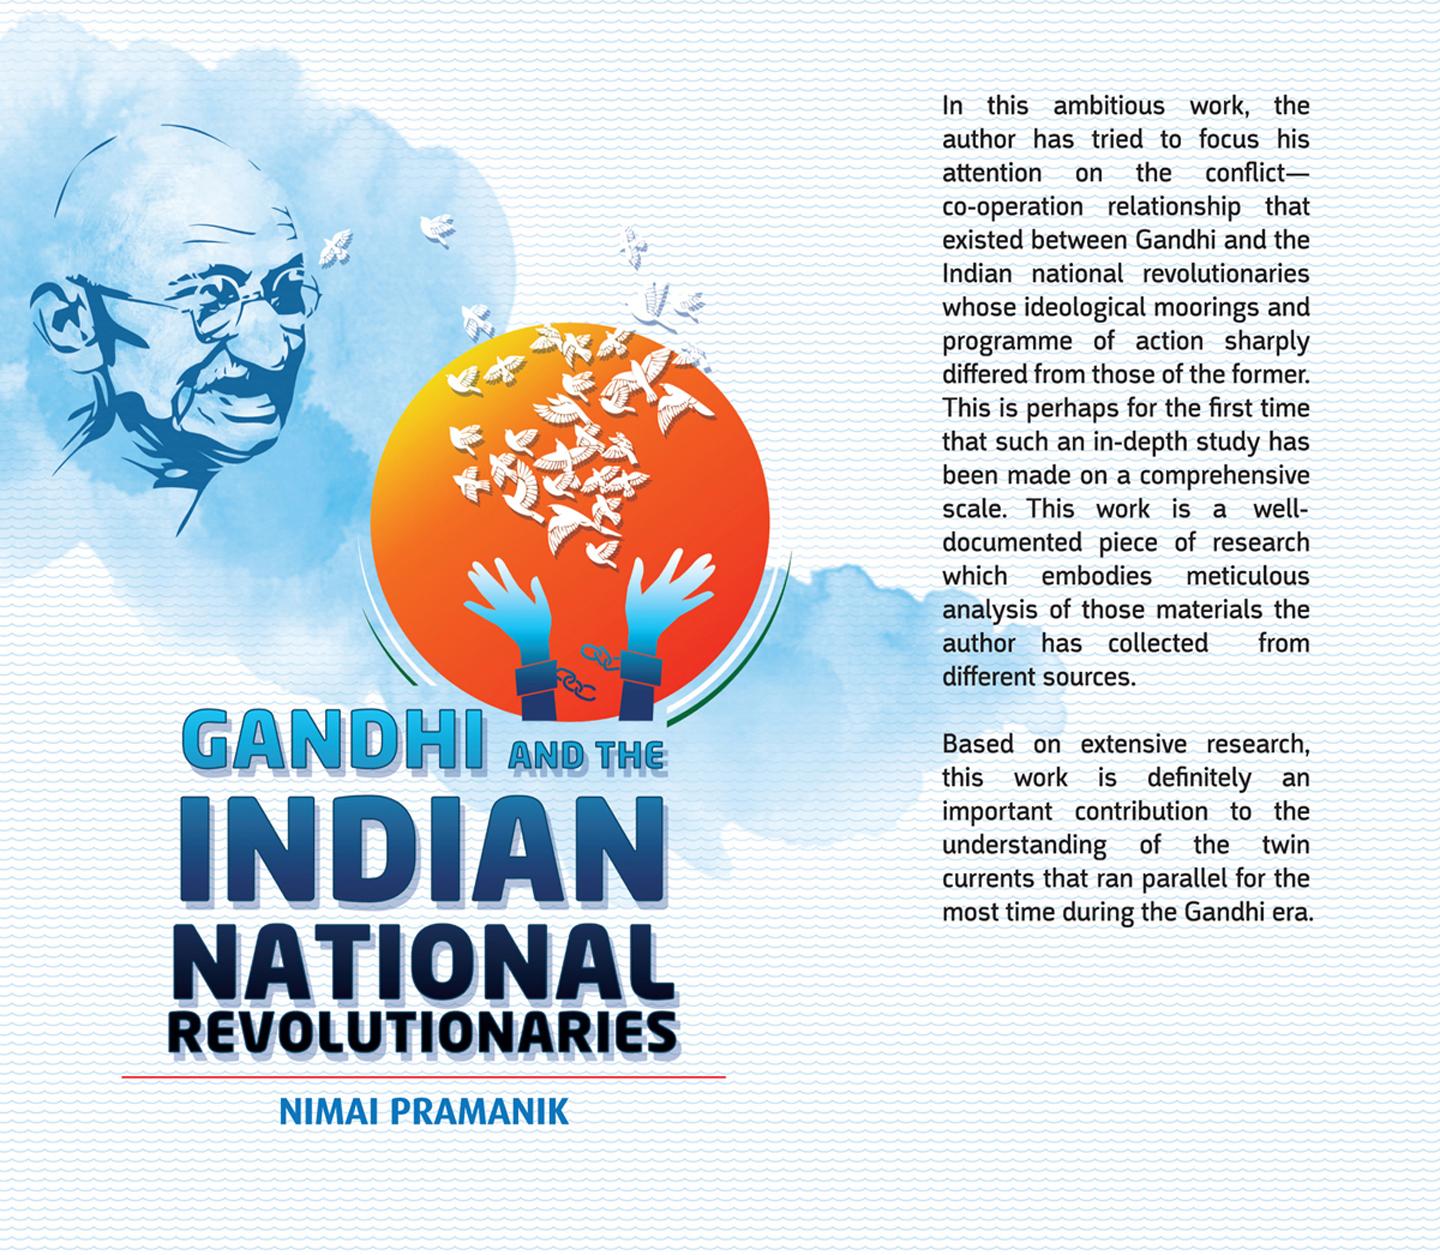 Gandhi and the Indian National Revolutionaries